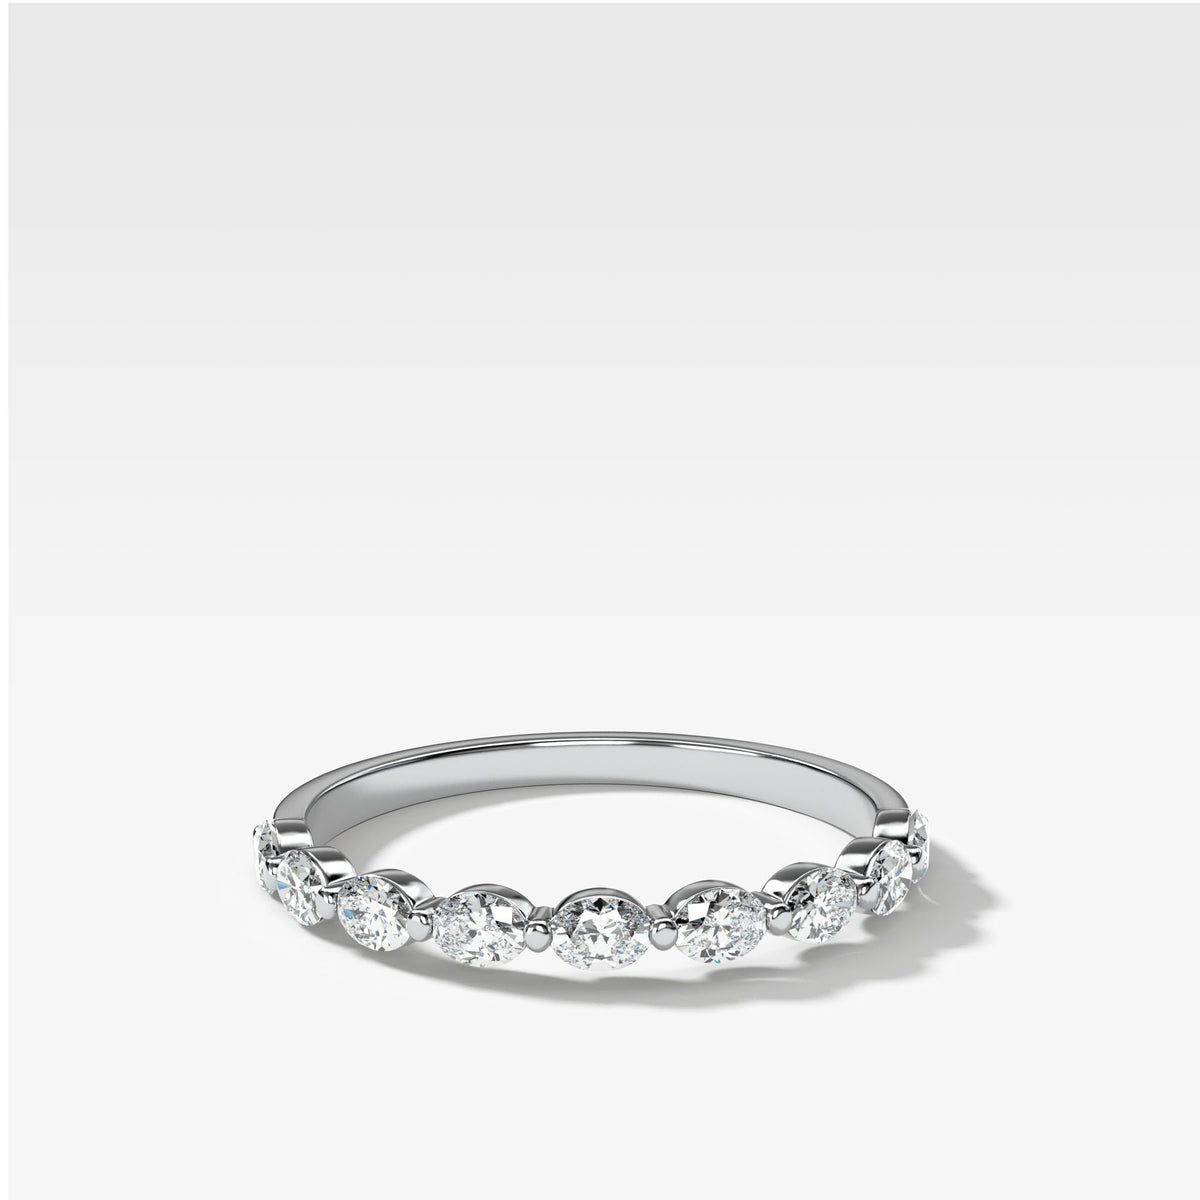 Oval Interstellar Wedding Band by Good Stone in White Gold